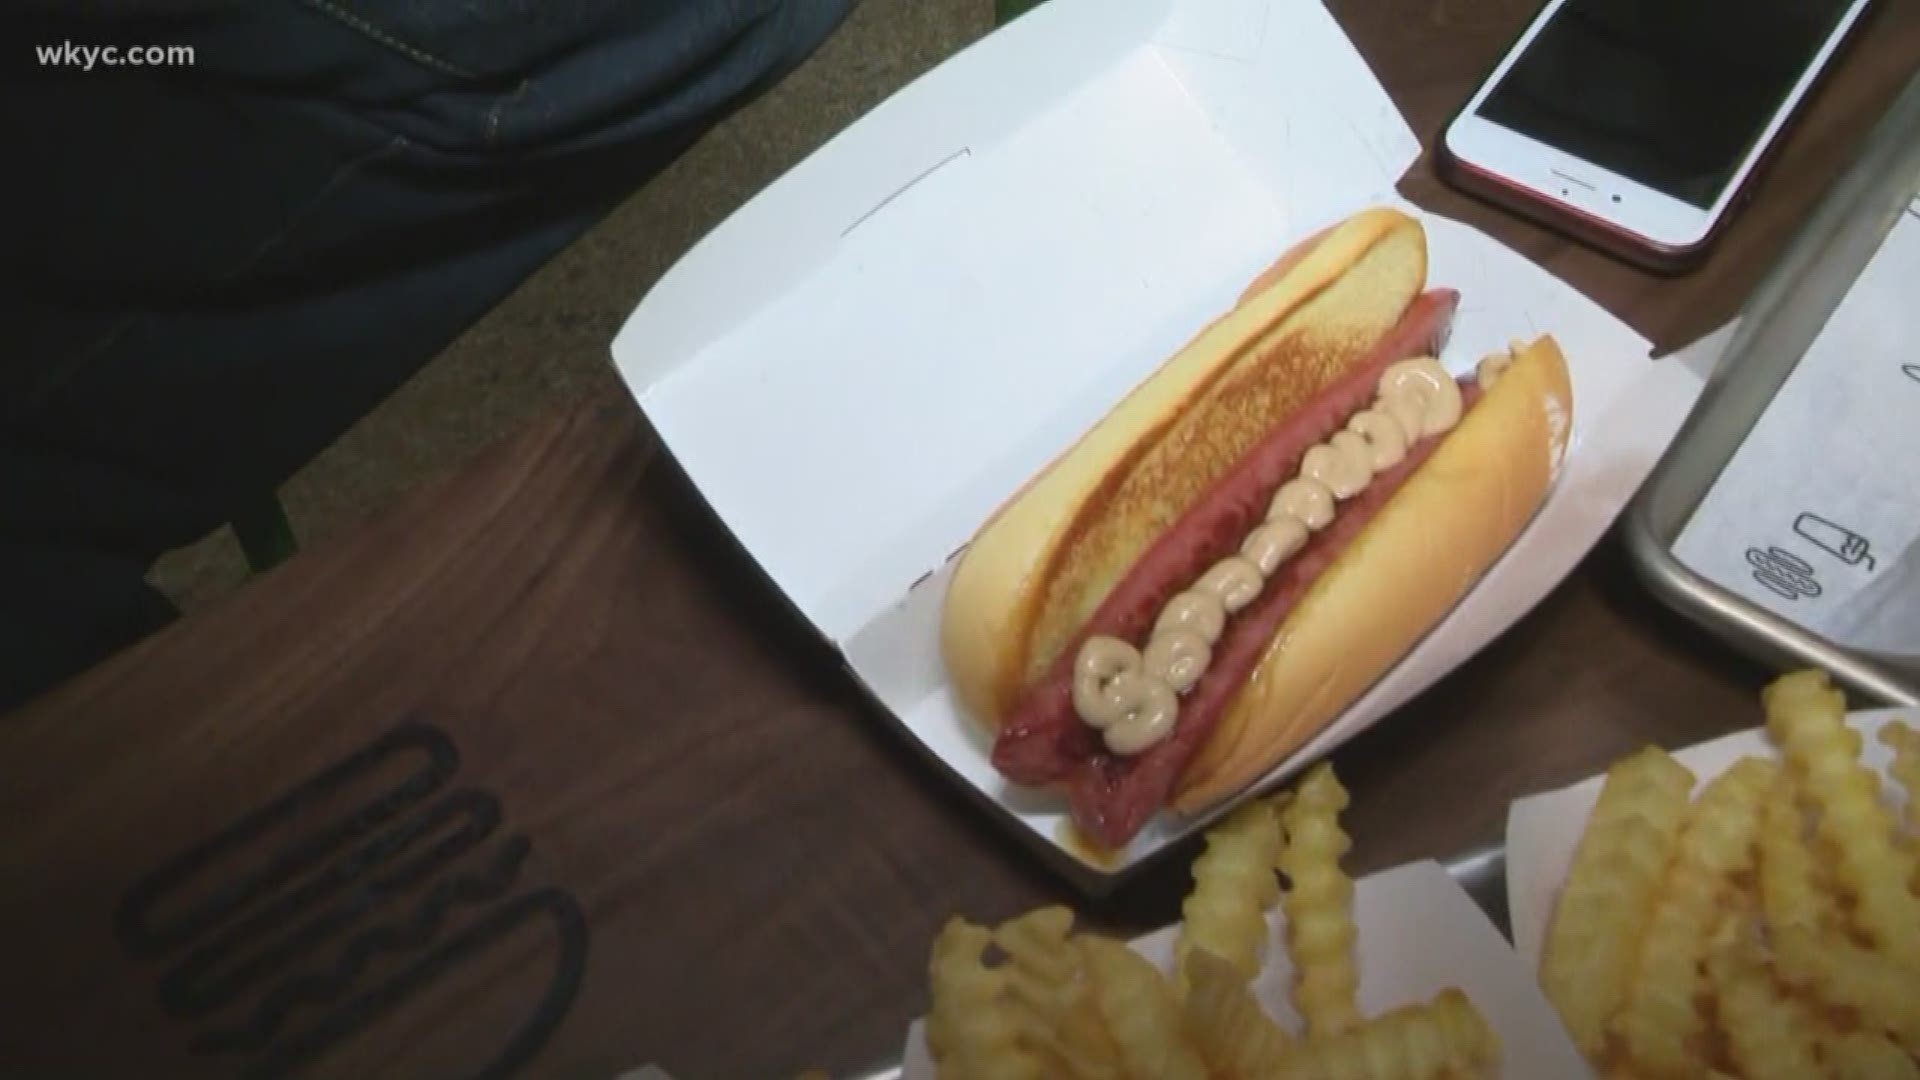 June 20, 2019: You can't have a hot dog in Cleveland without Bertman's ballpark mustard. It's a condiment Shake Shack has adopted at all of its Cleveland-area locations, including the new restaurant opening downtown at 601 Euclid Avenue.